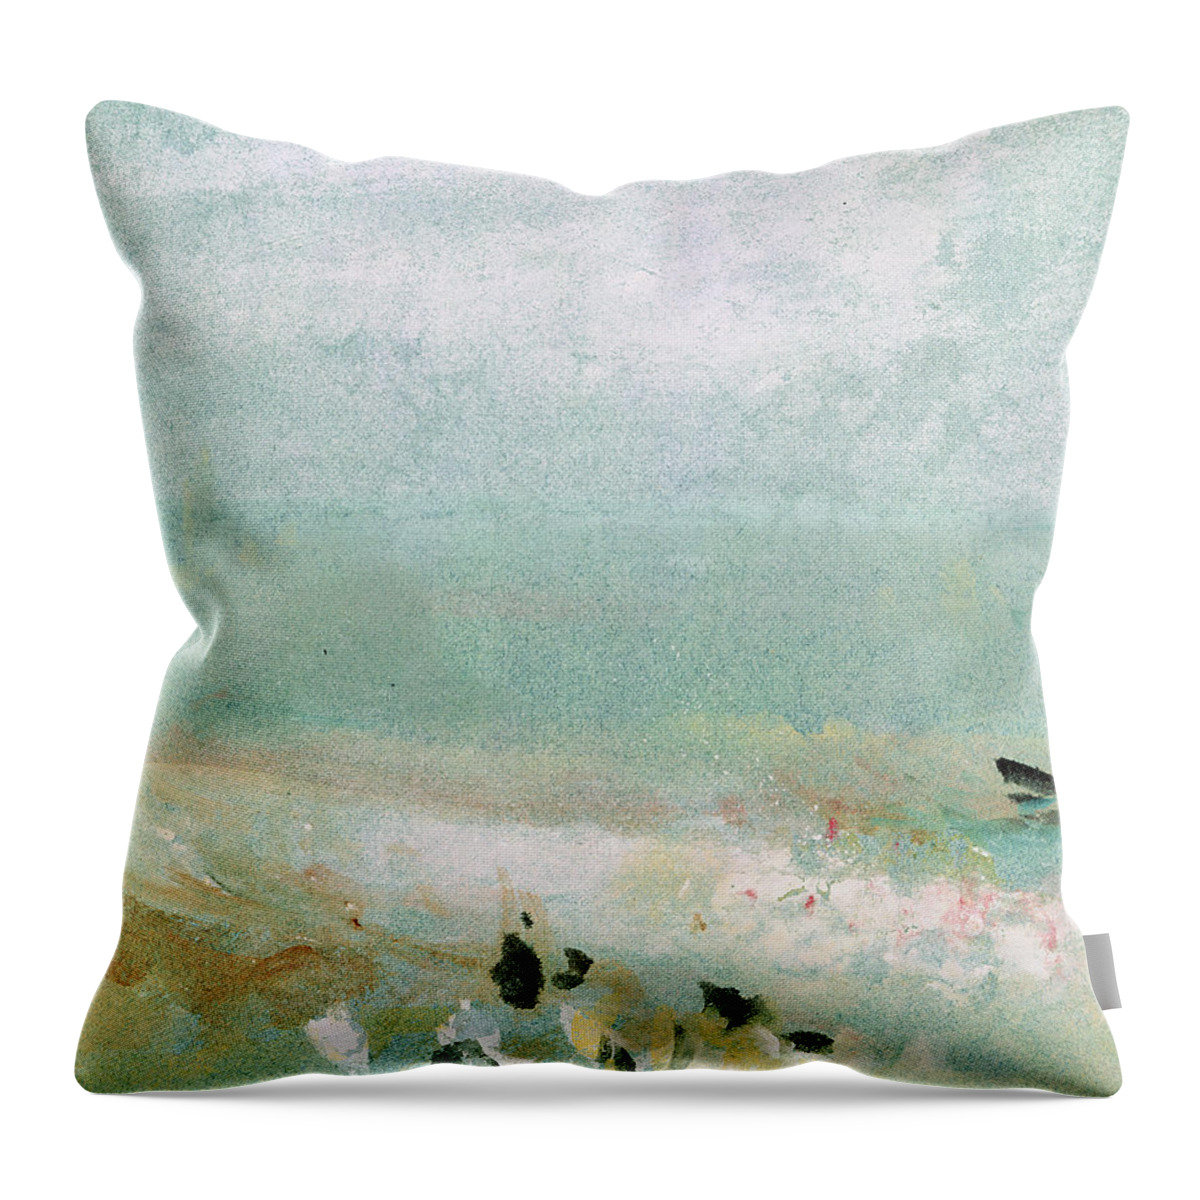 Water Throw Pillow featuring the painting River bank by Joseph Mallord William Turner